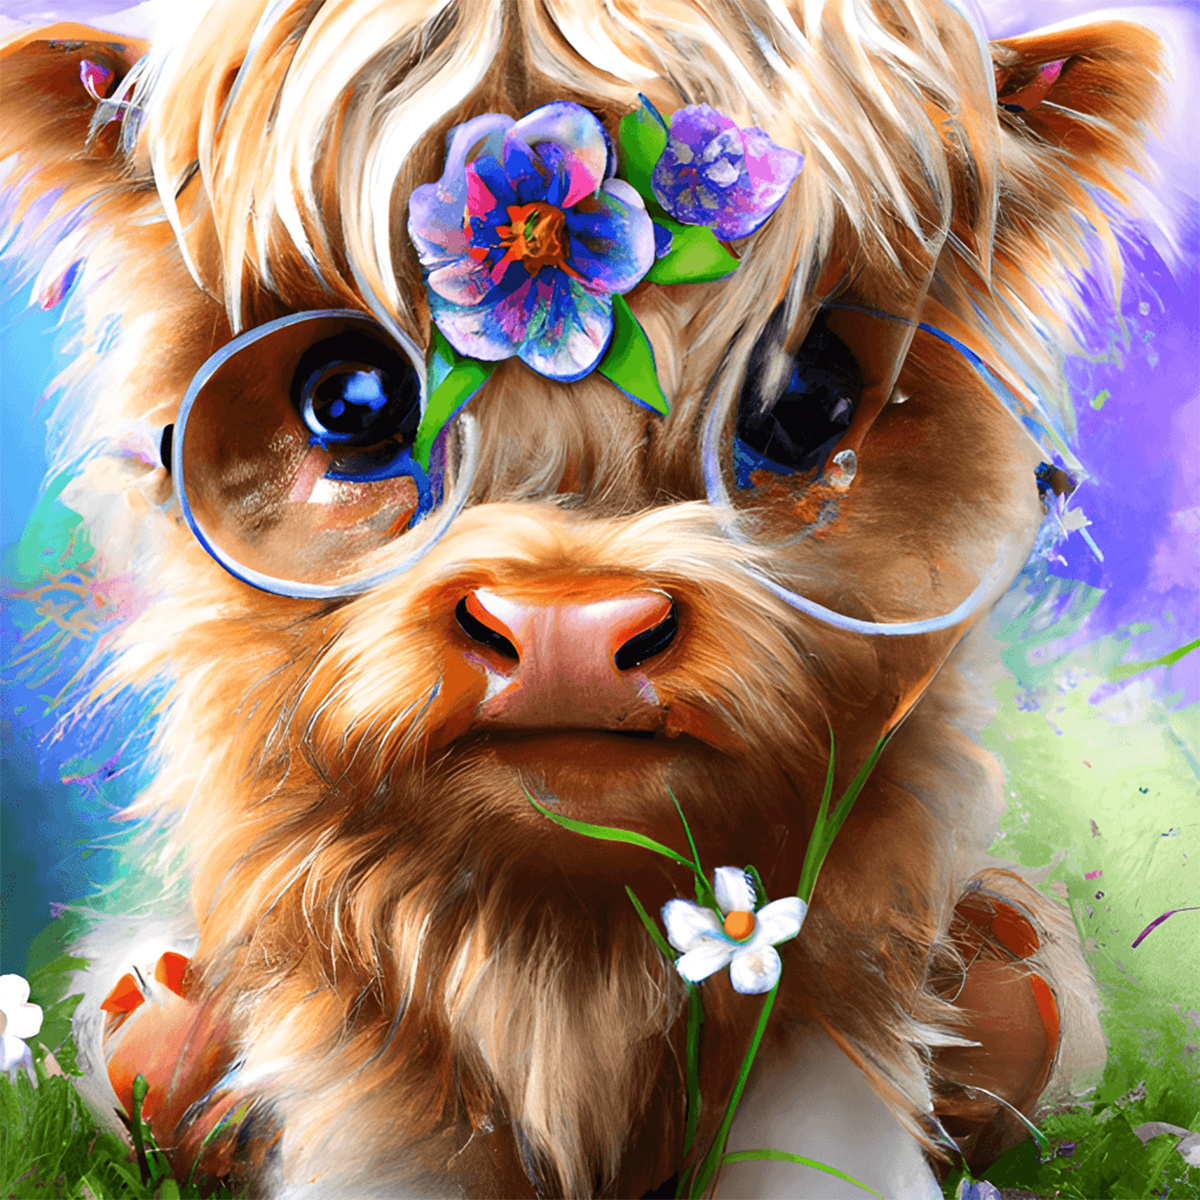 

1pc Artificial Diamond Painting Kits Happy Chibi Highland Cow With Mane Artificial Diamond Painting Kits For Adults, 20x20cm/7.9*7.9inch, Frameless